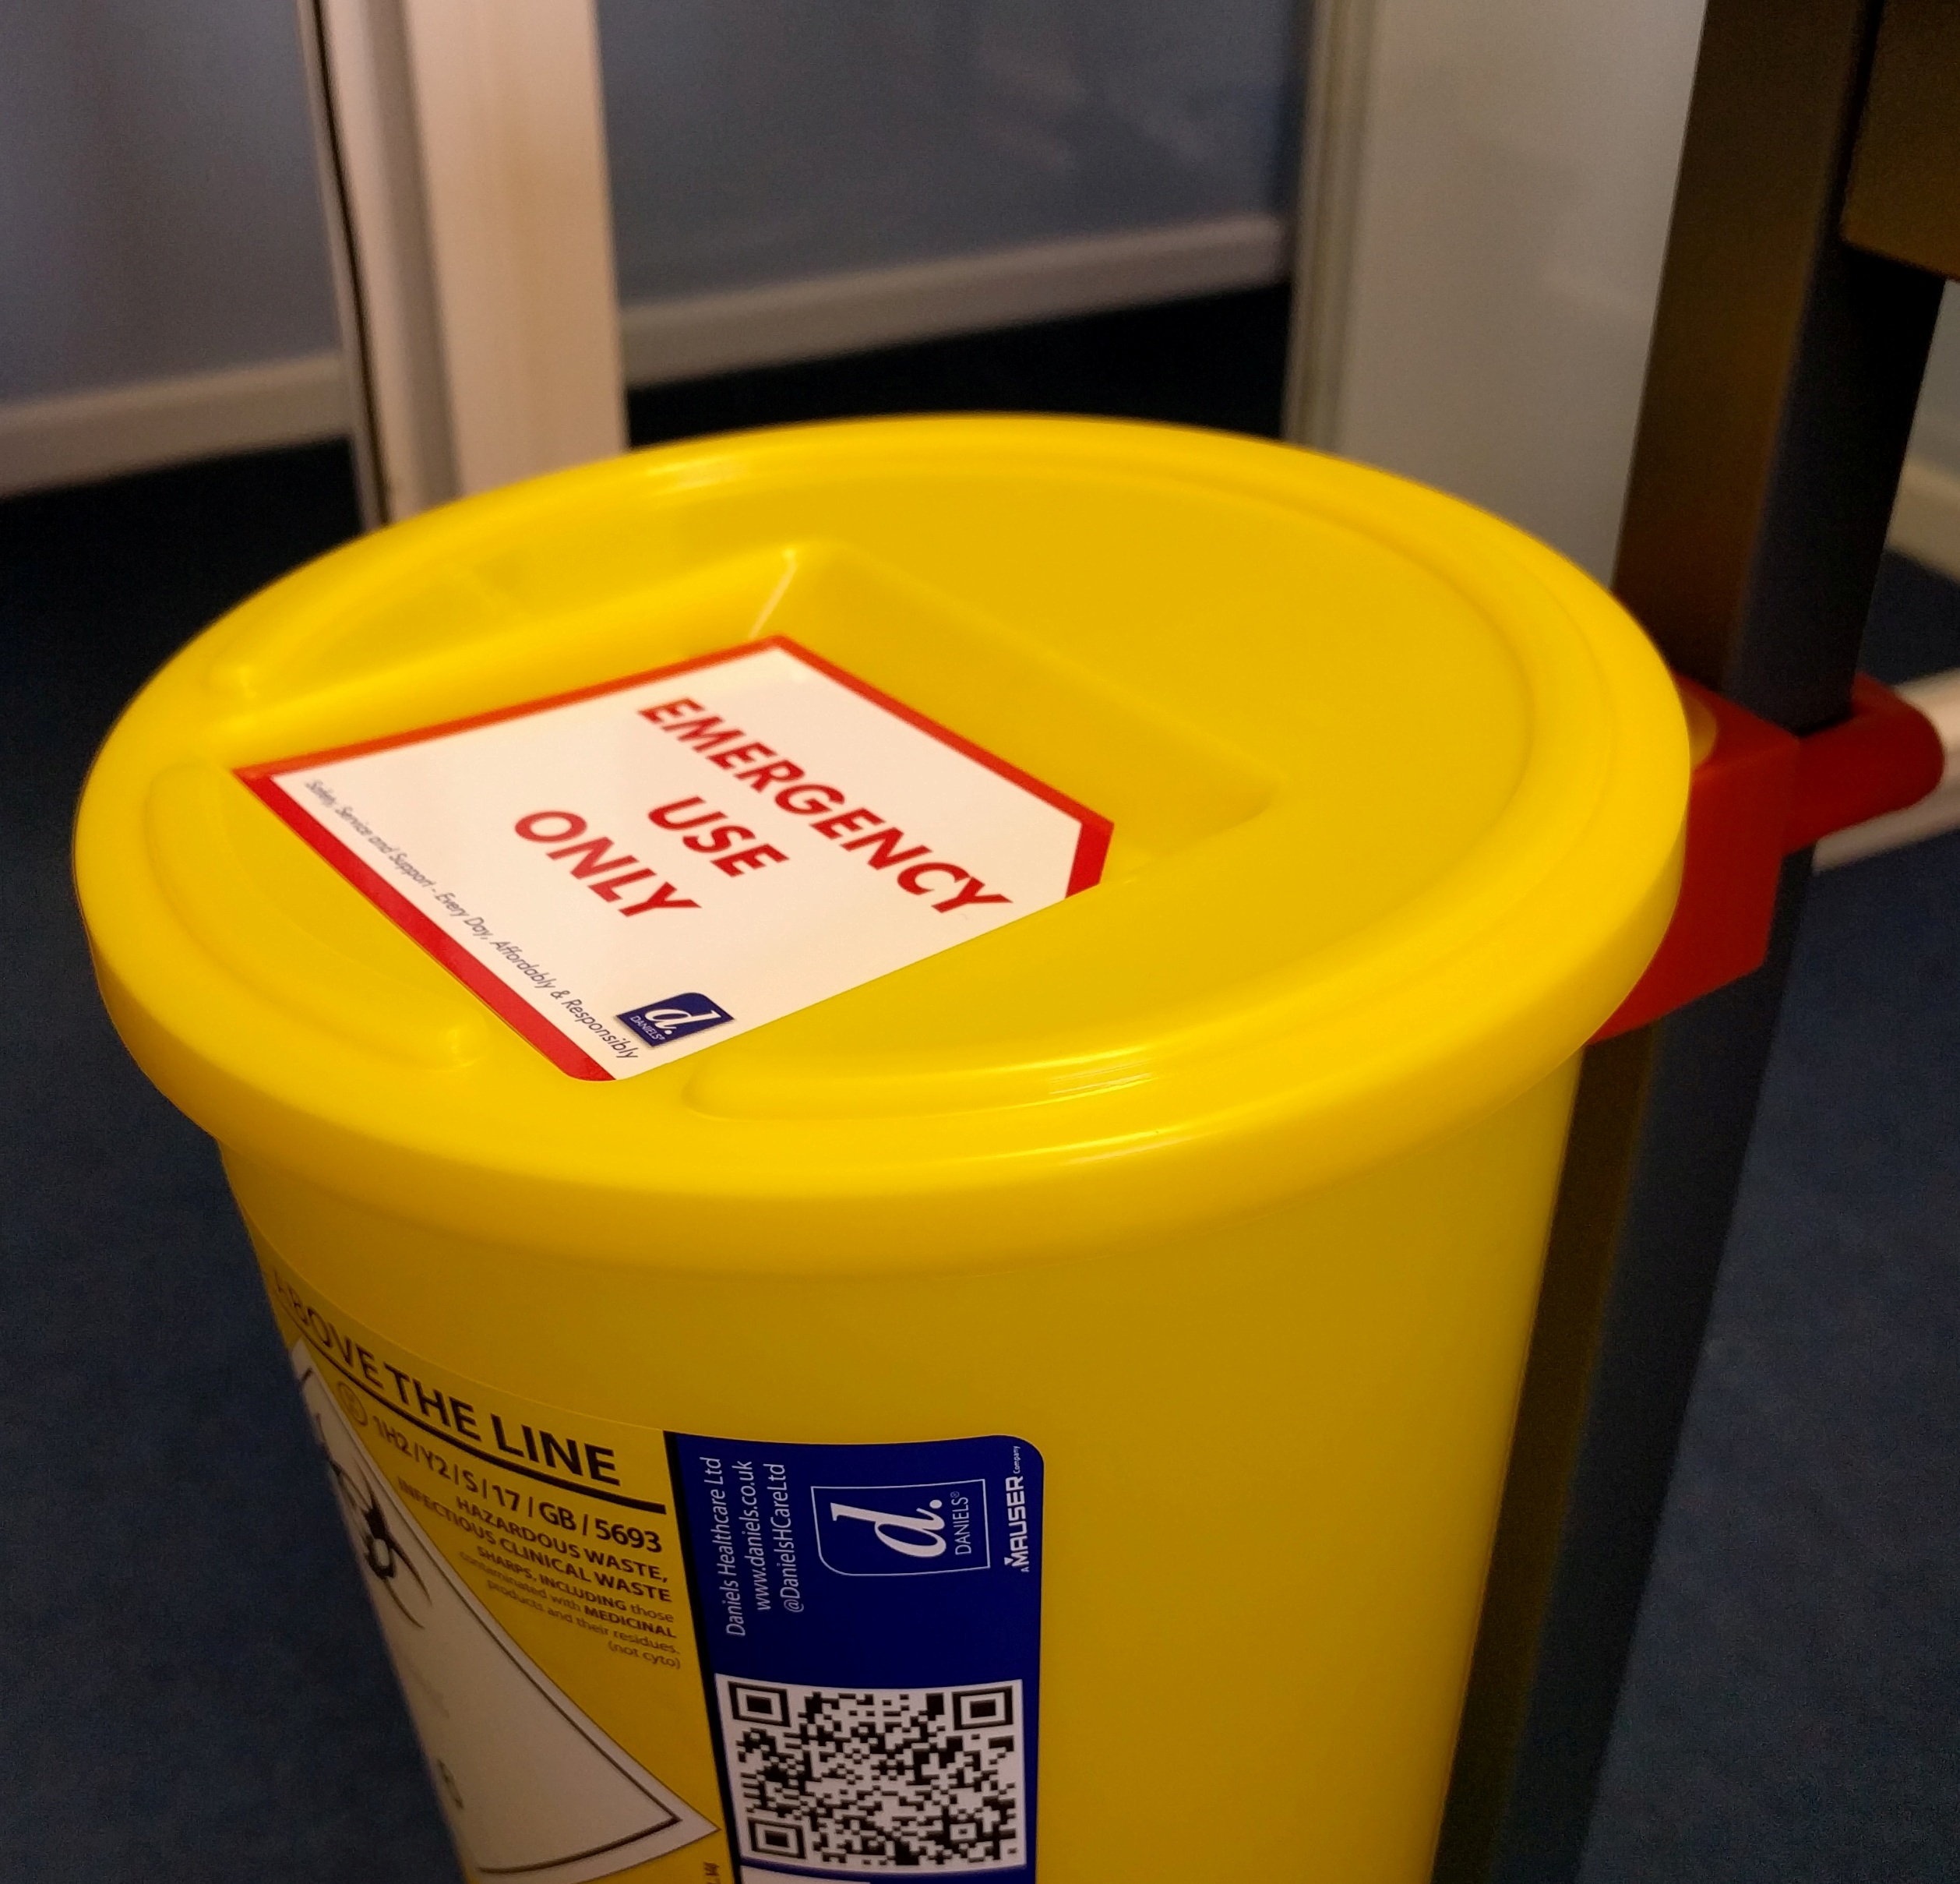 SHARPSGUARD® container with Emergency Use Only card